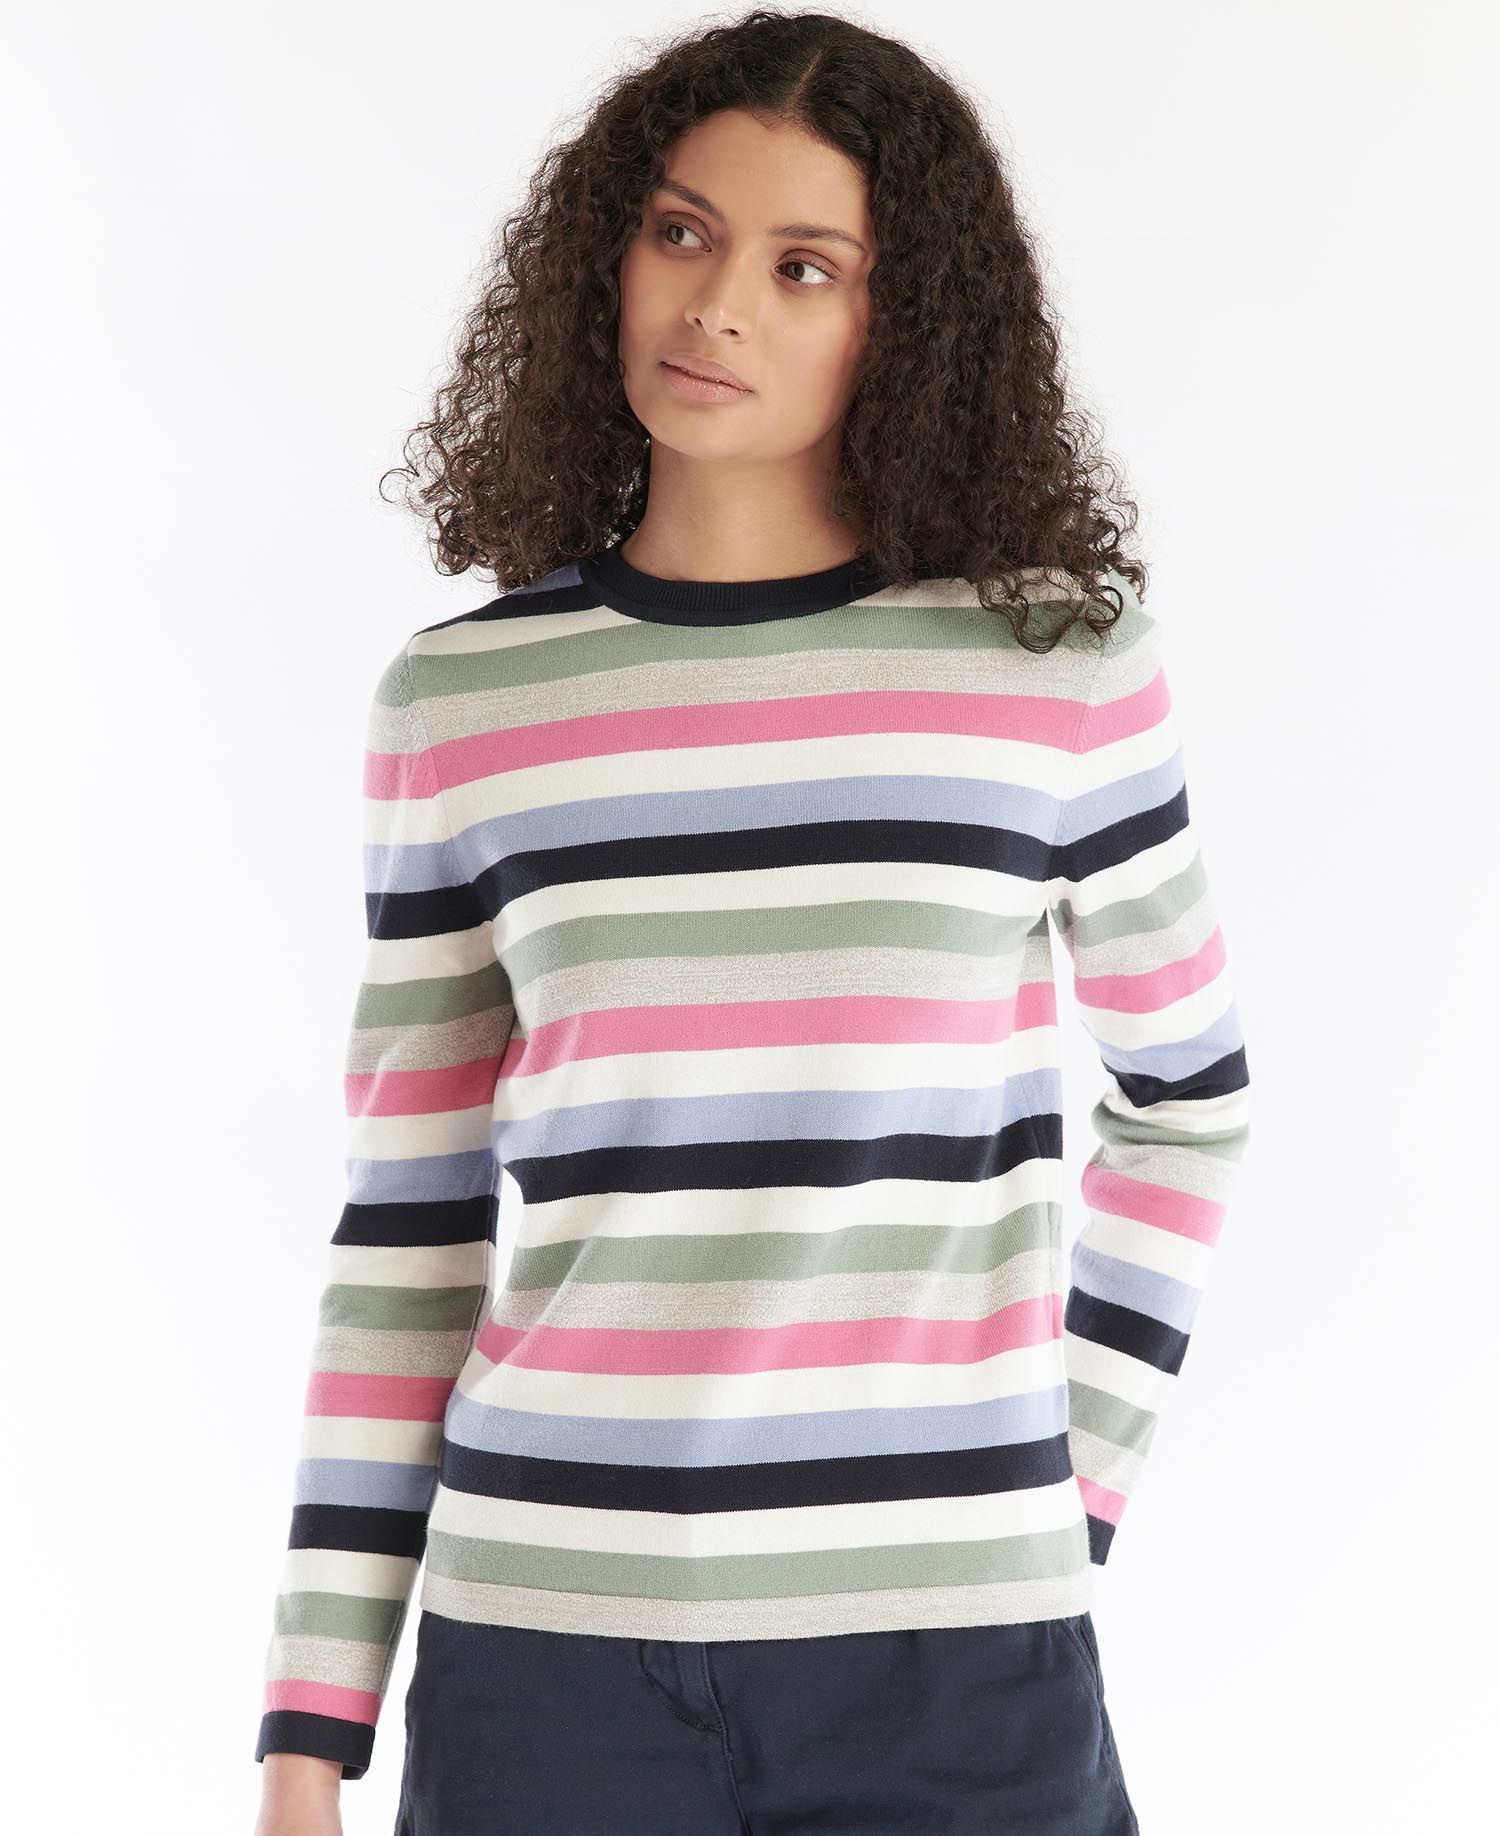 Barbour - Women's Padstow Knit Crew Neck - Off White